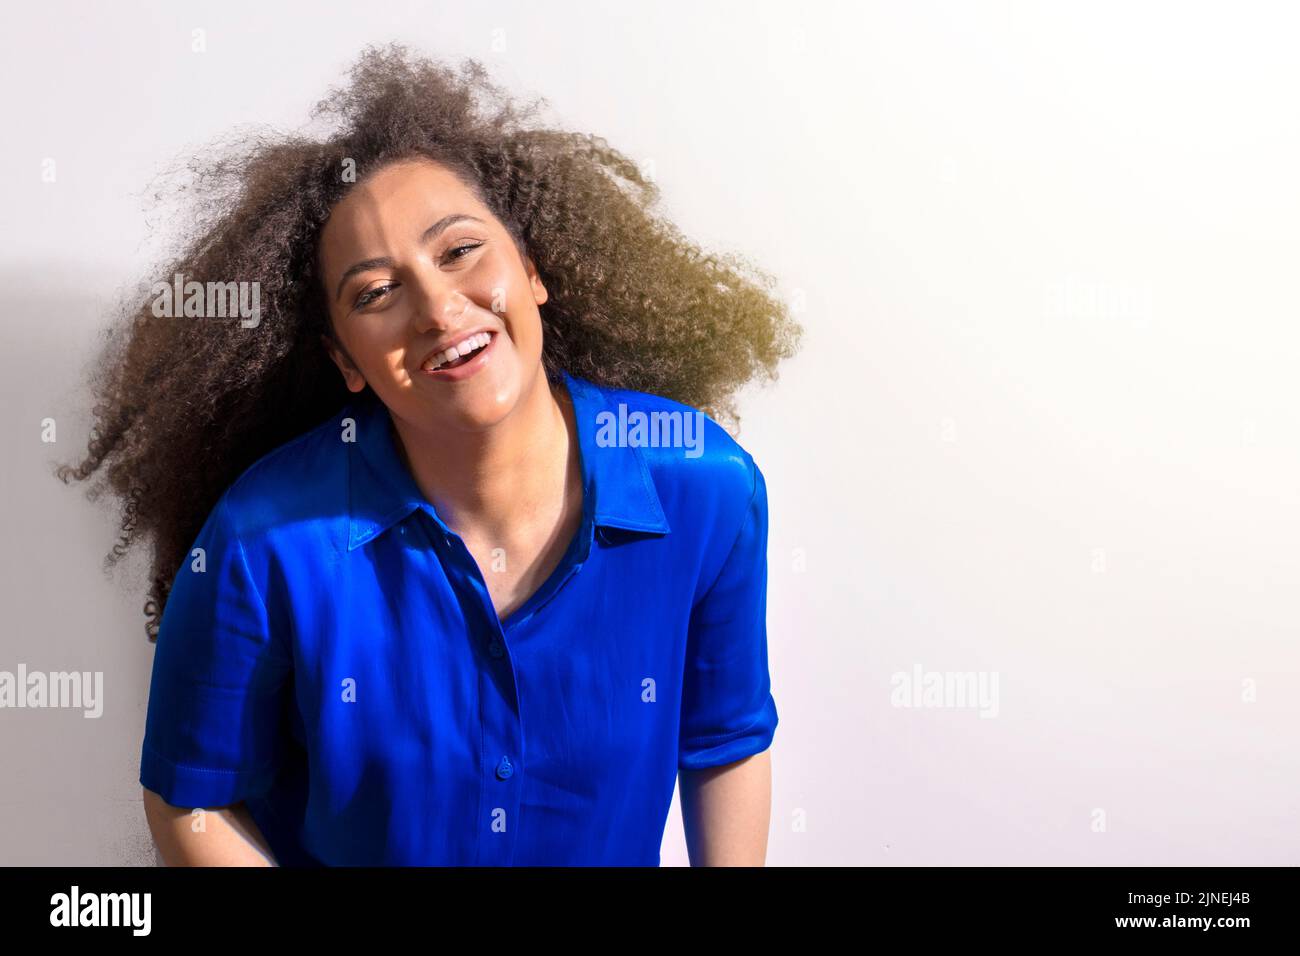 Young girl with afro hair shaking her big hair. Smiling on white background Stock Photo